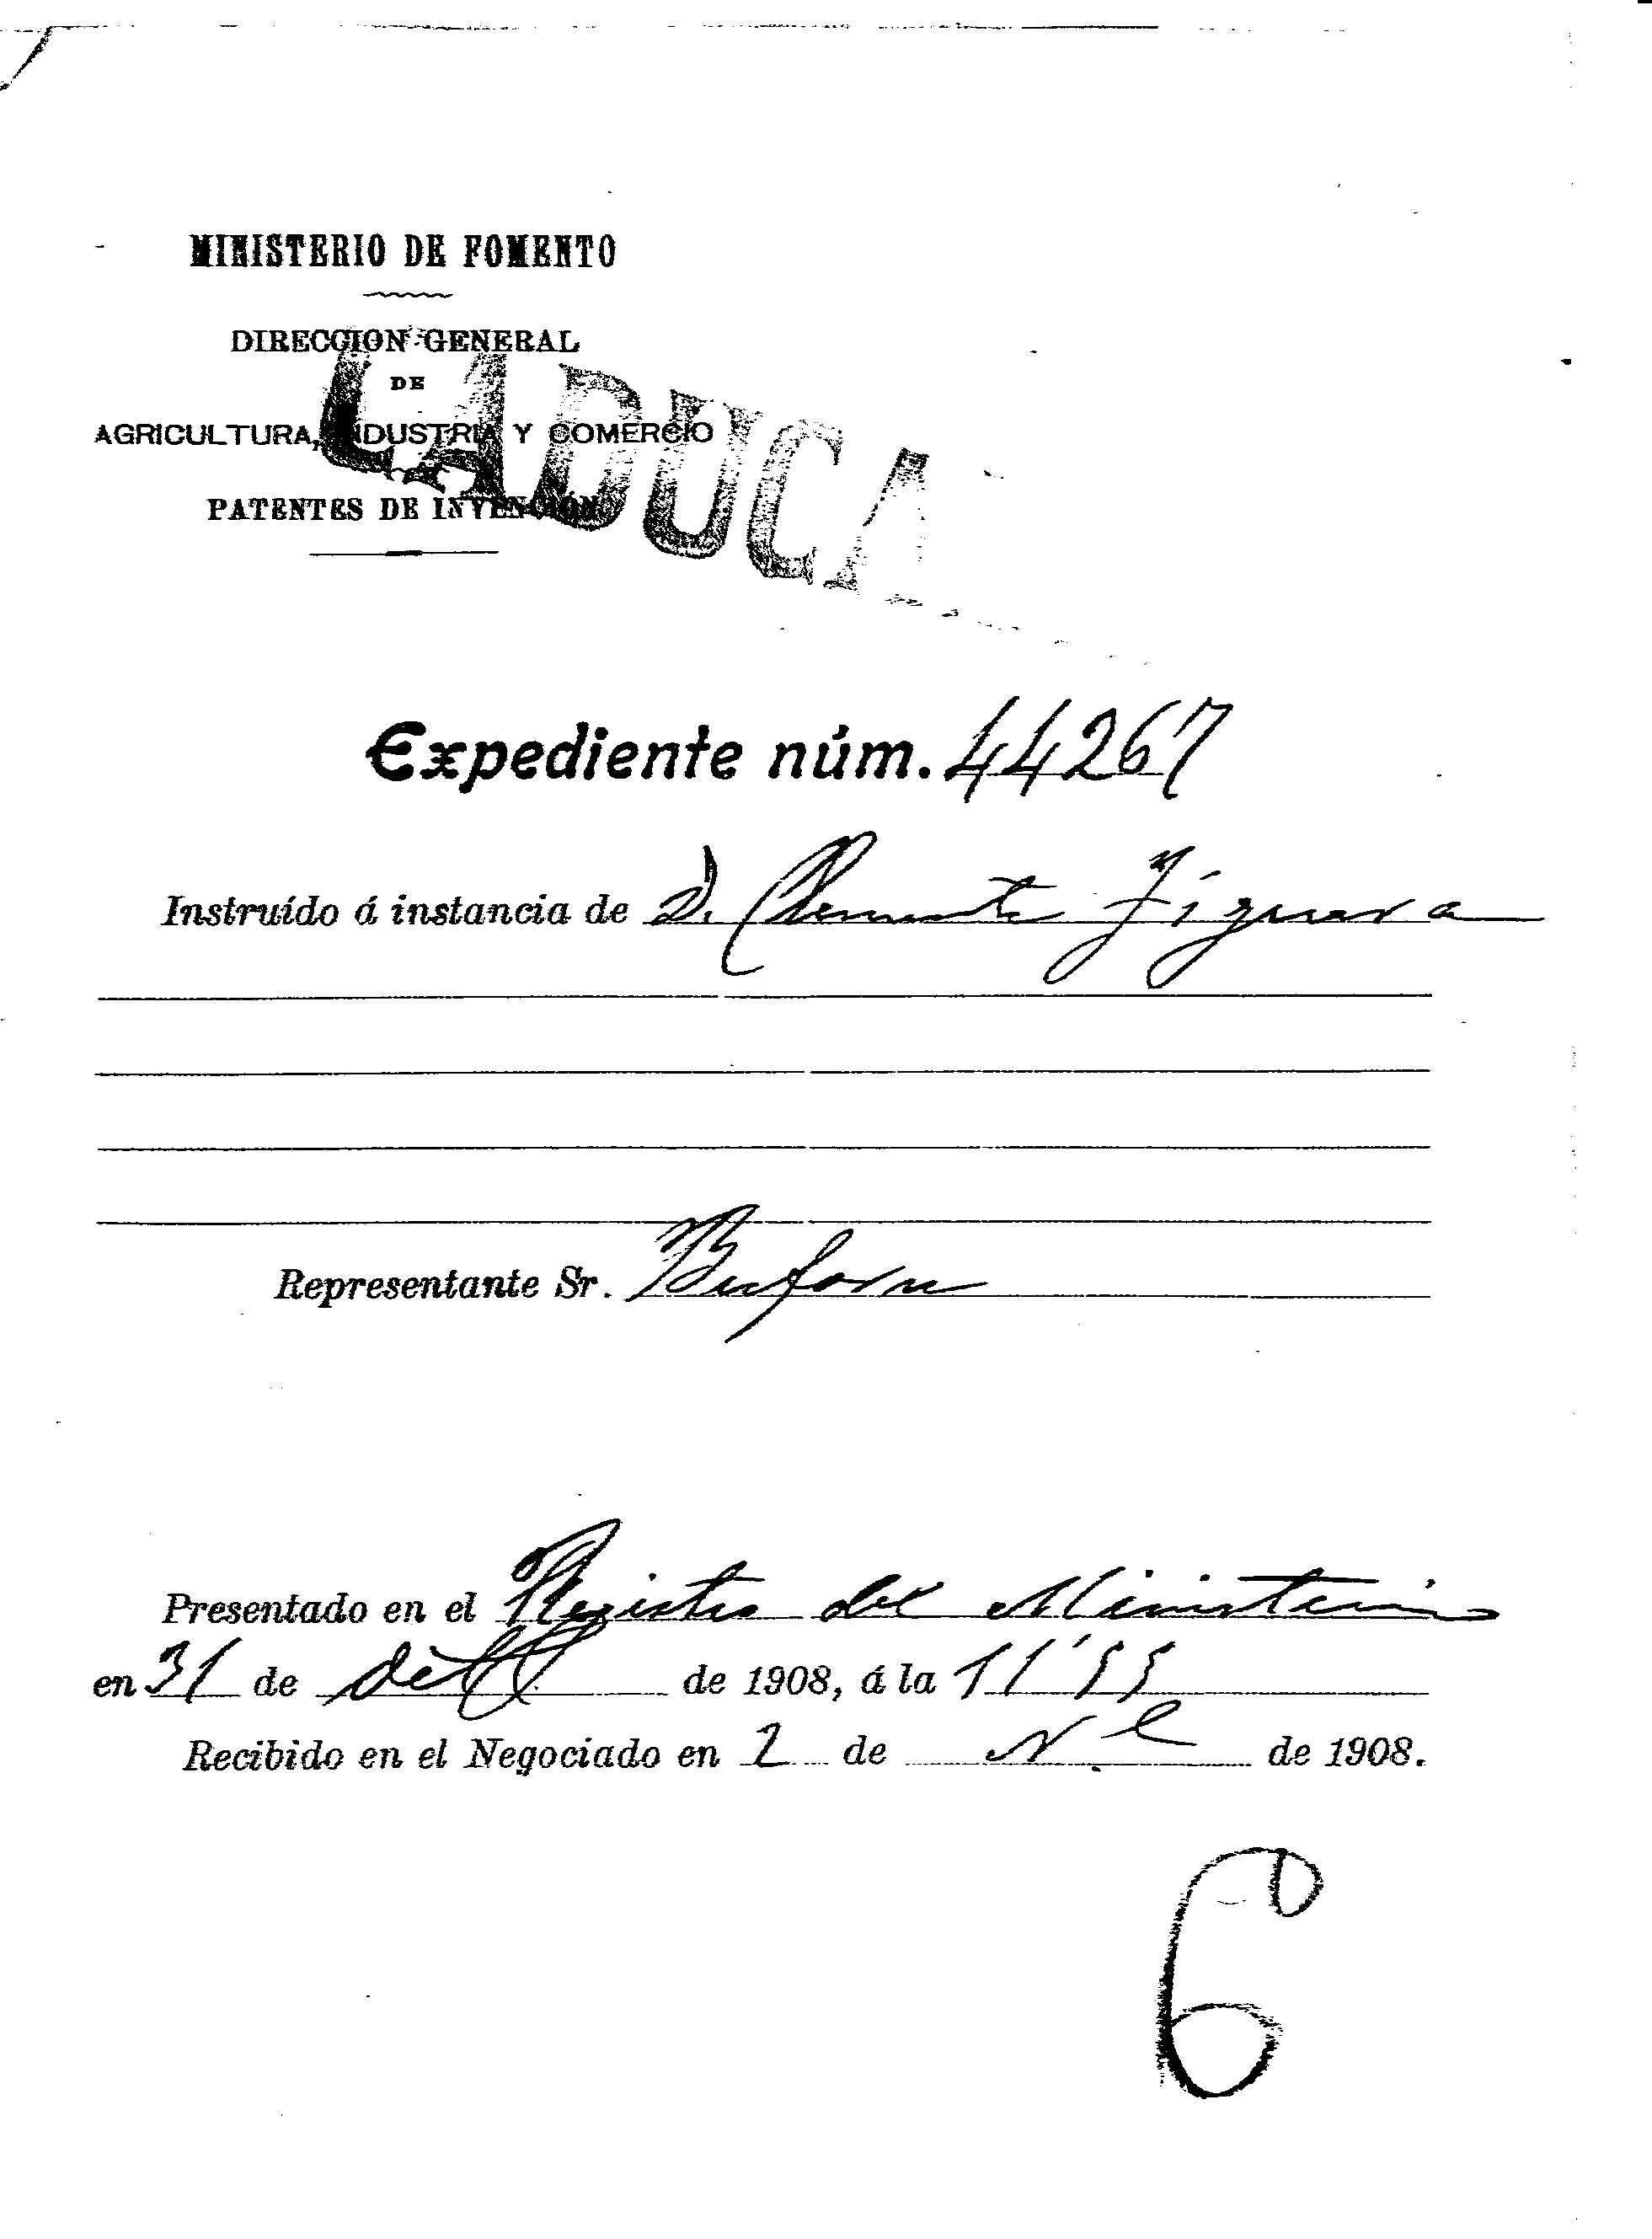 Clemente Figuera Patente 1908_Num_44267_scanned_OCR_Page_01.jpg